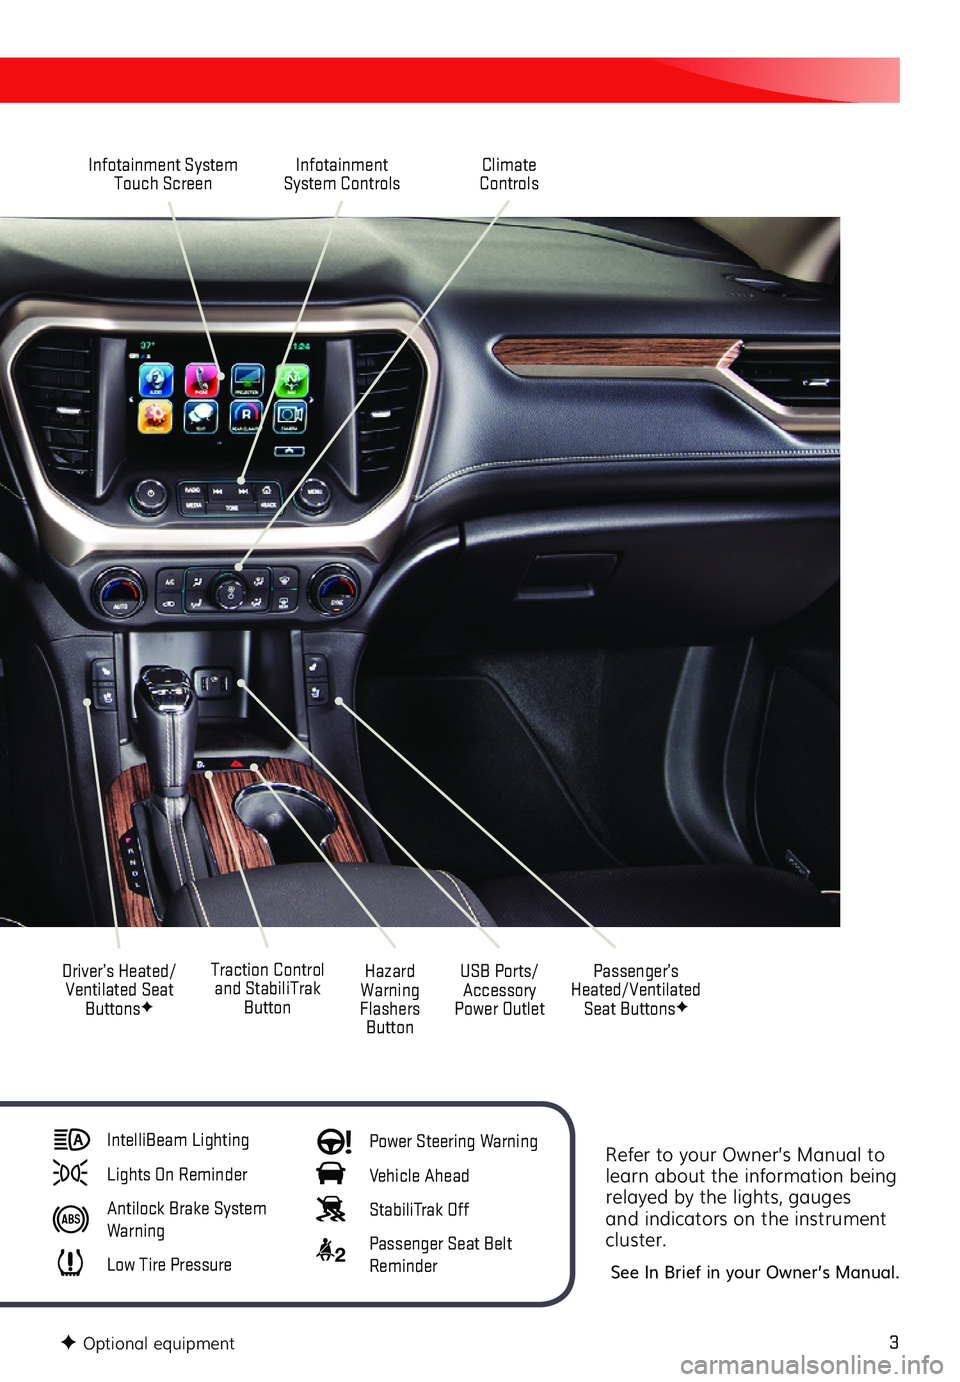 GMC ACADIA 2019  Get To Know Guide 3
Refer to your Owner’s Manual to learn about the information being relayed by the lights, gauges and indicators on the instrument cluster.
See In Brief in your Owner’s Manual.
Infotainment System